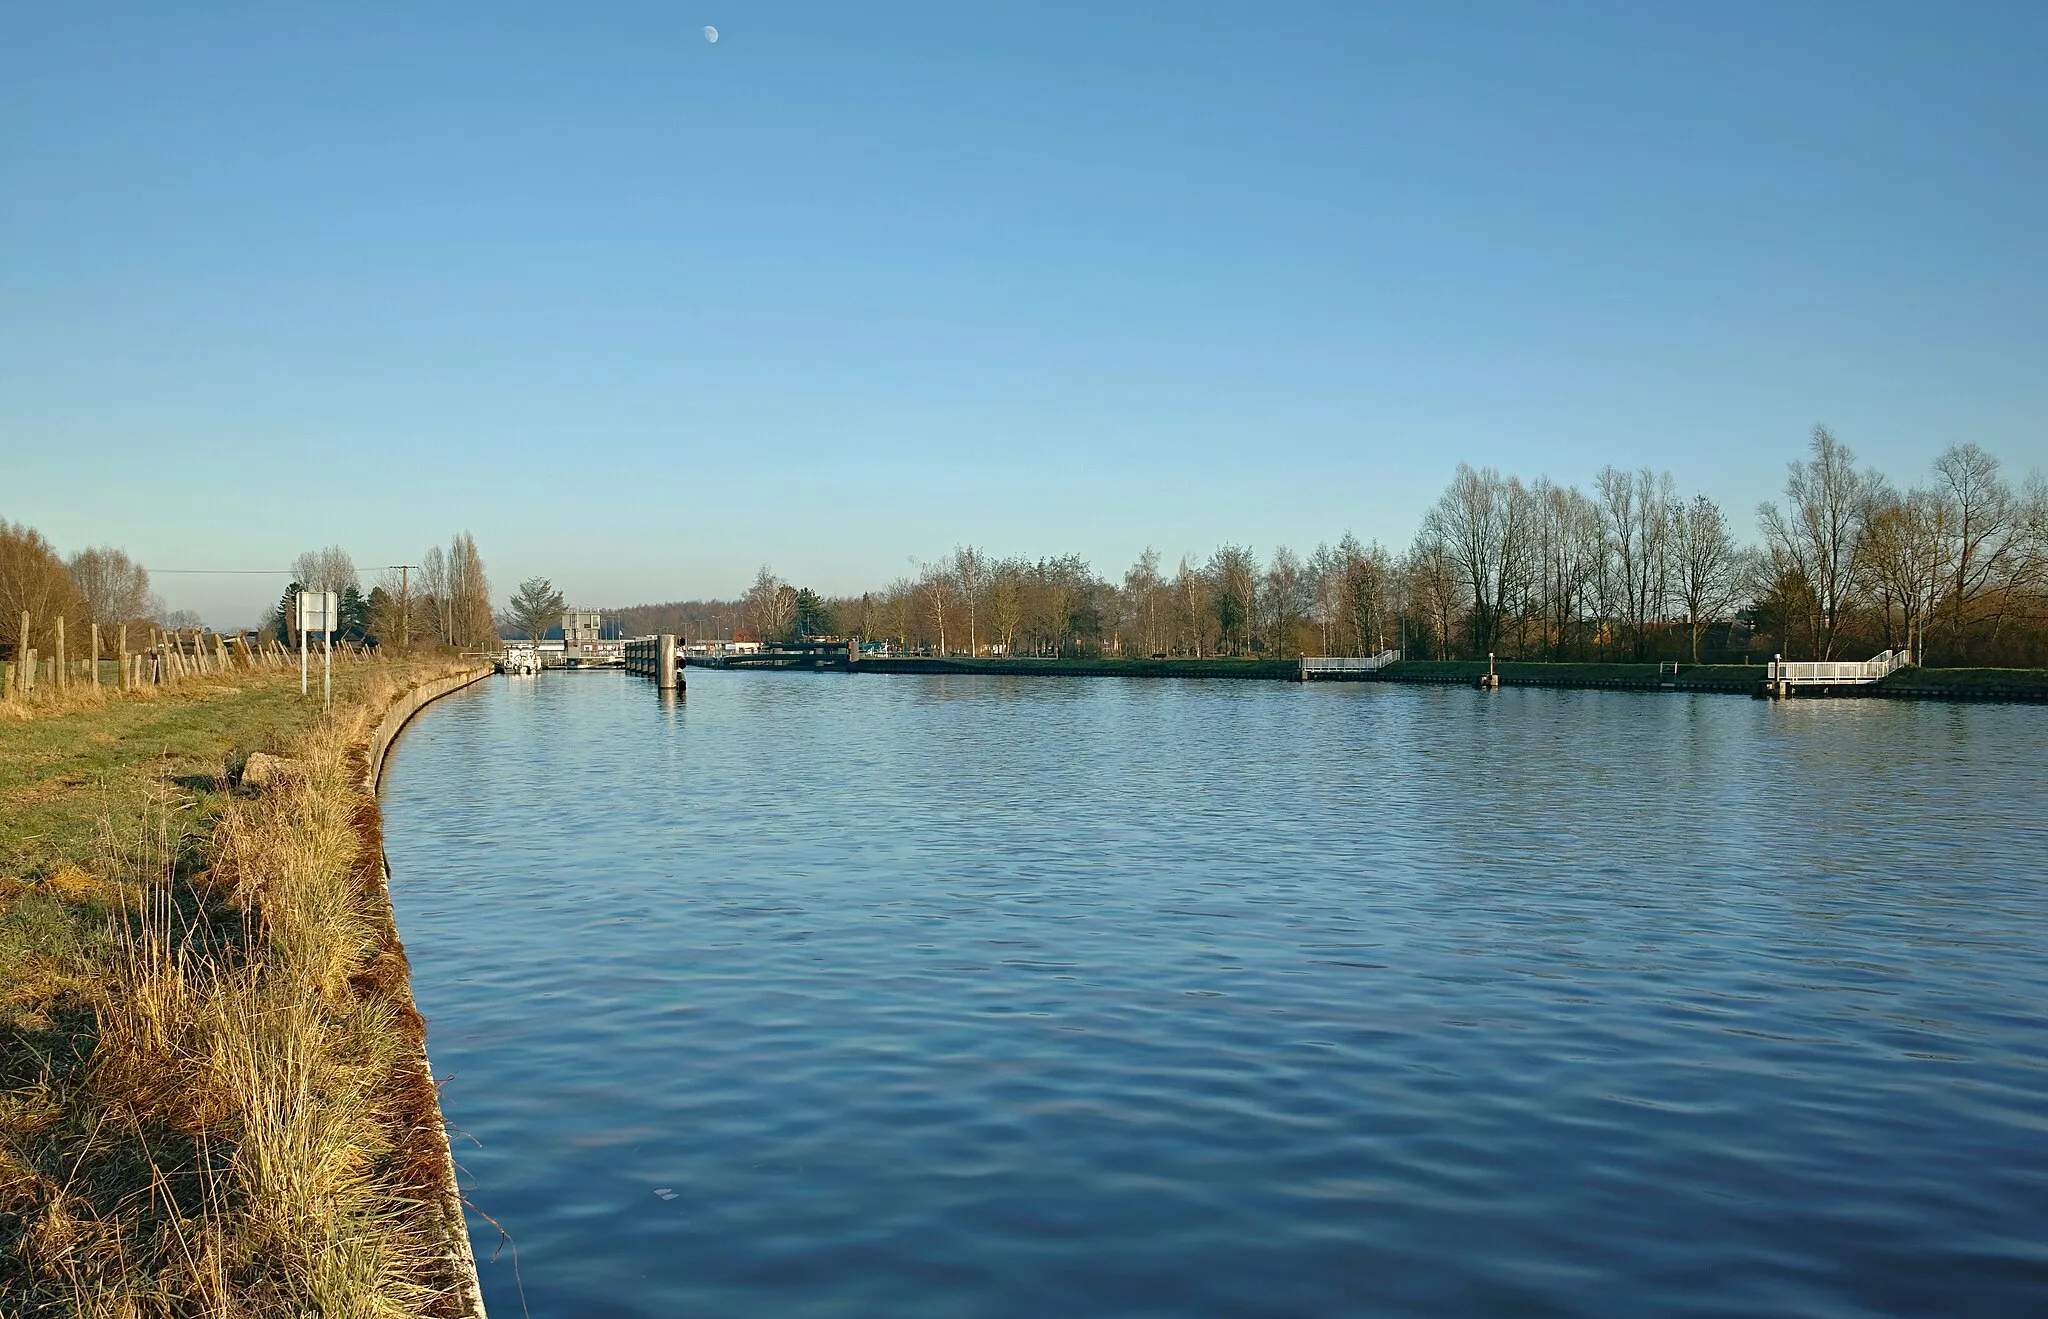 Photo showing: The surroundings of the Don lock, on the Haute Deûle canal.